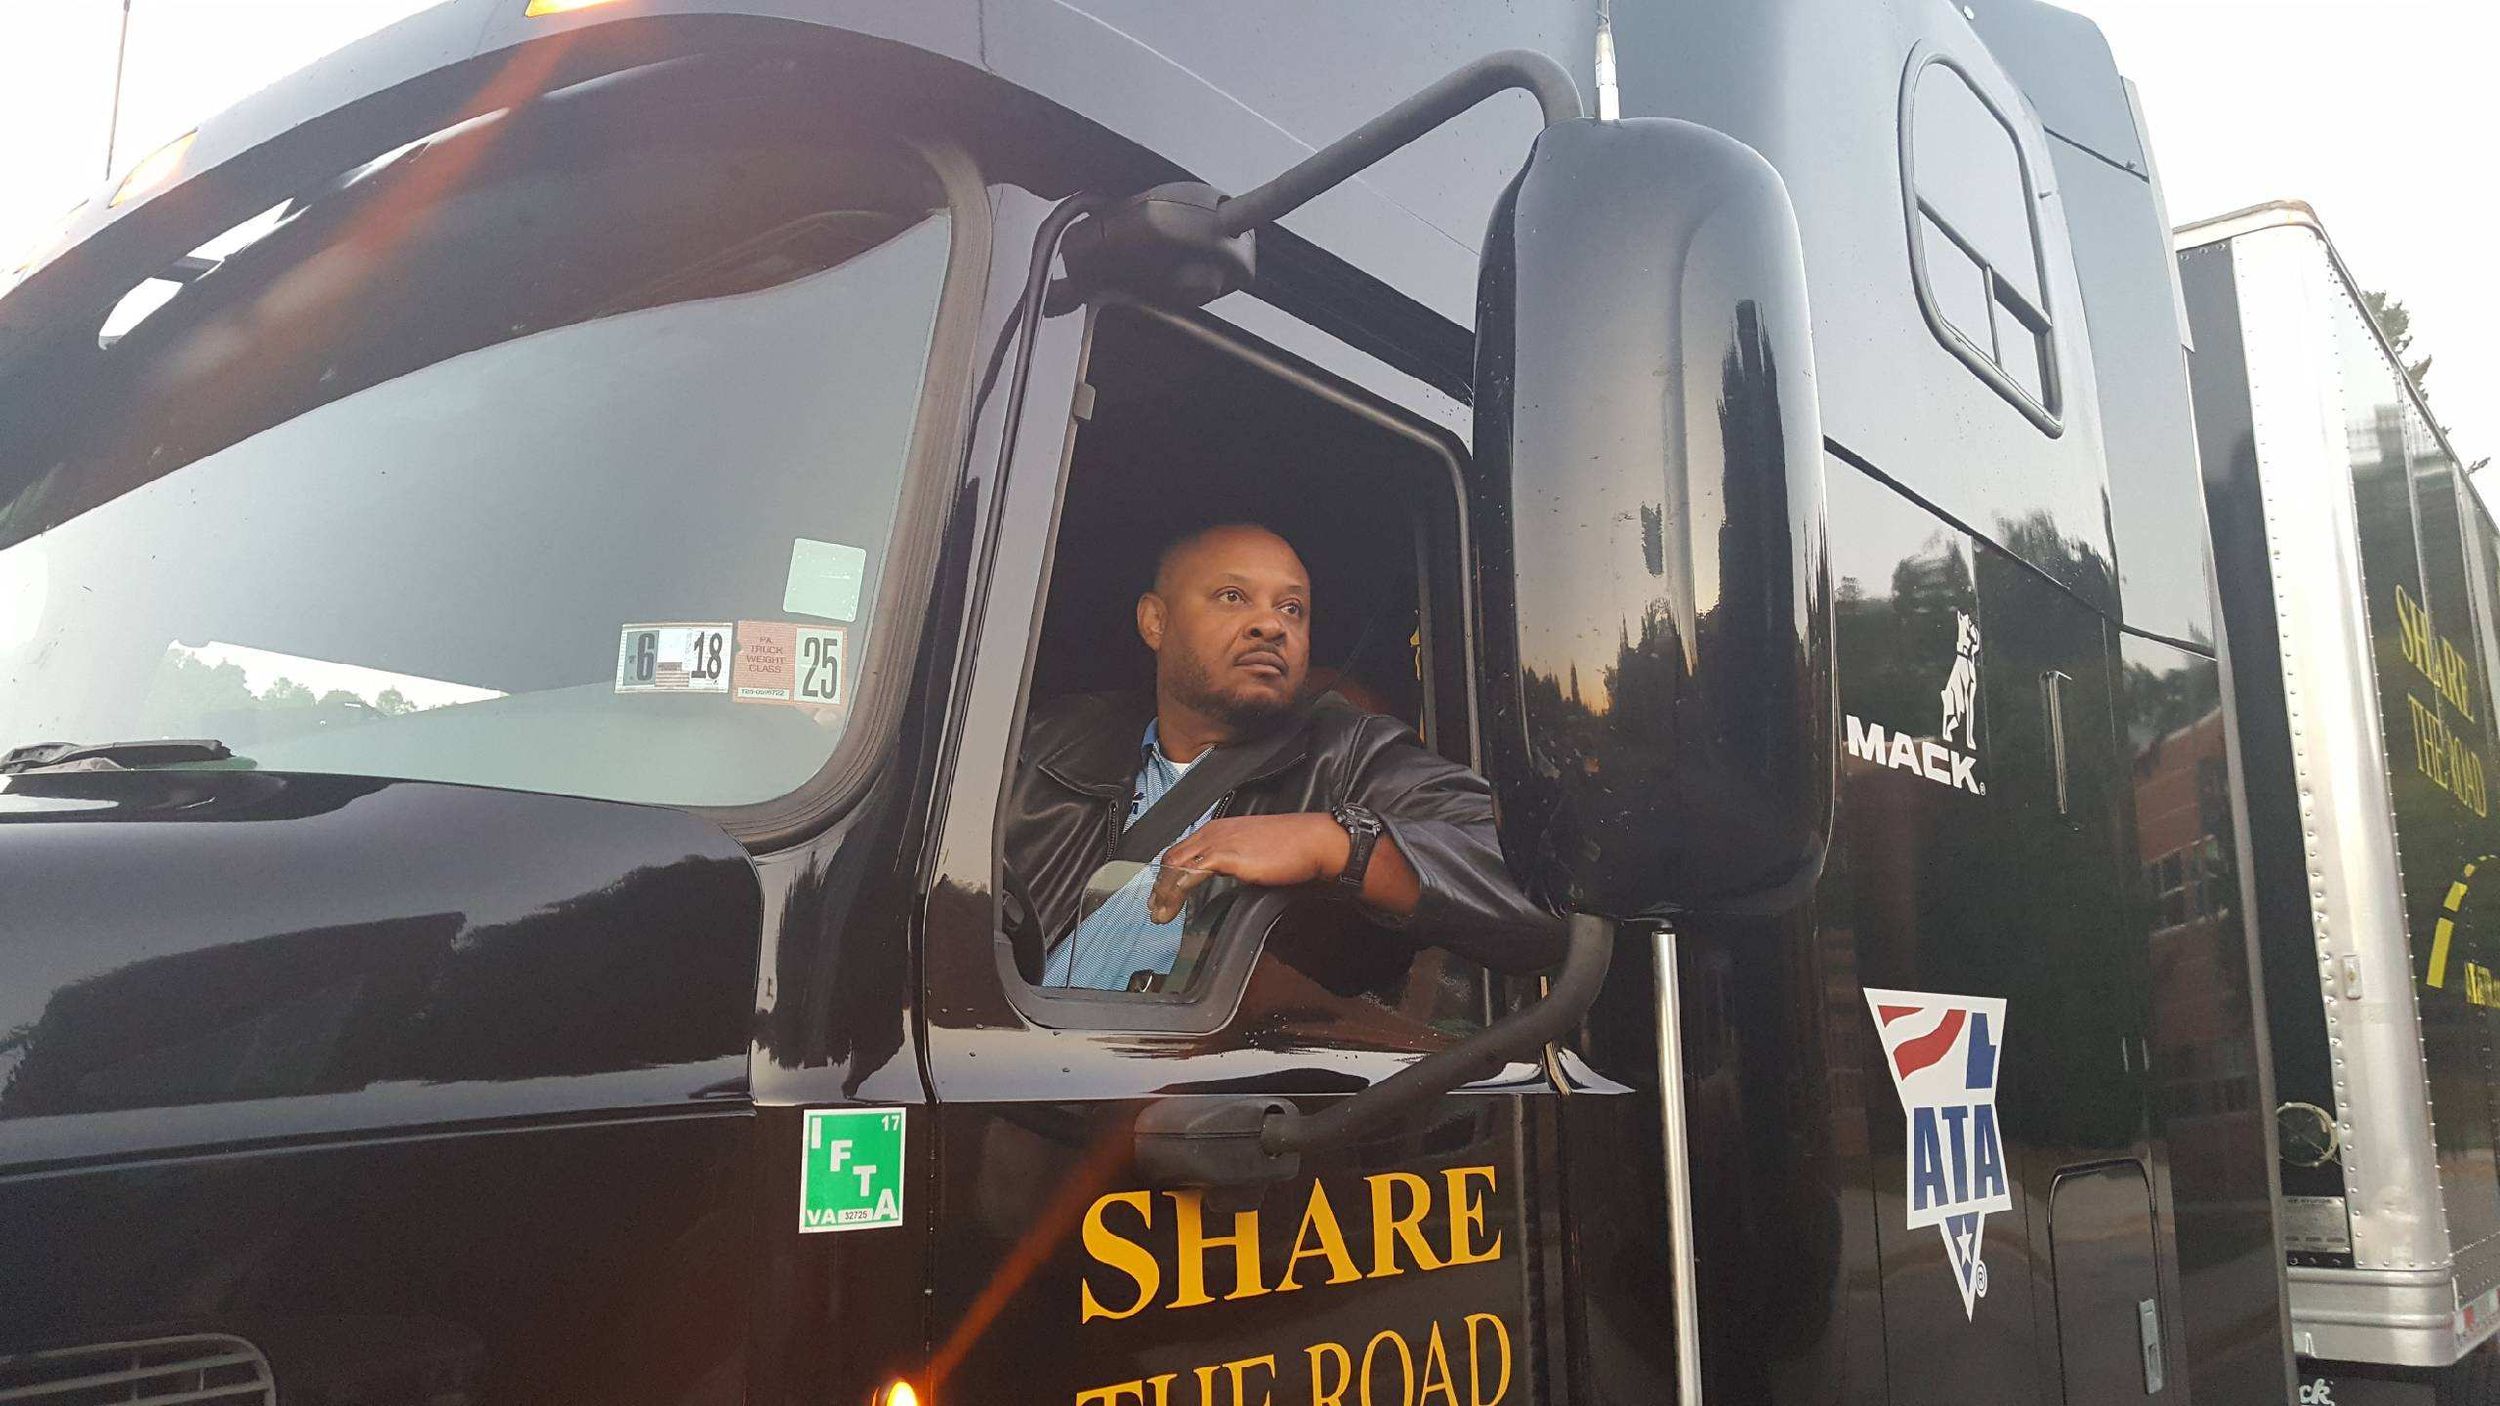 America’s Road Team Captains Help Young Drivers Safely Share the Road